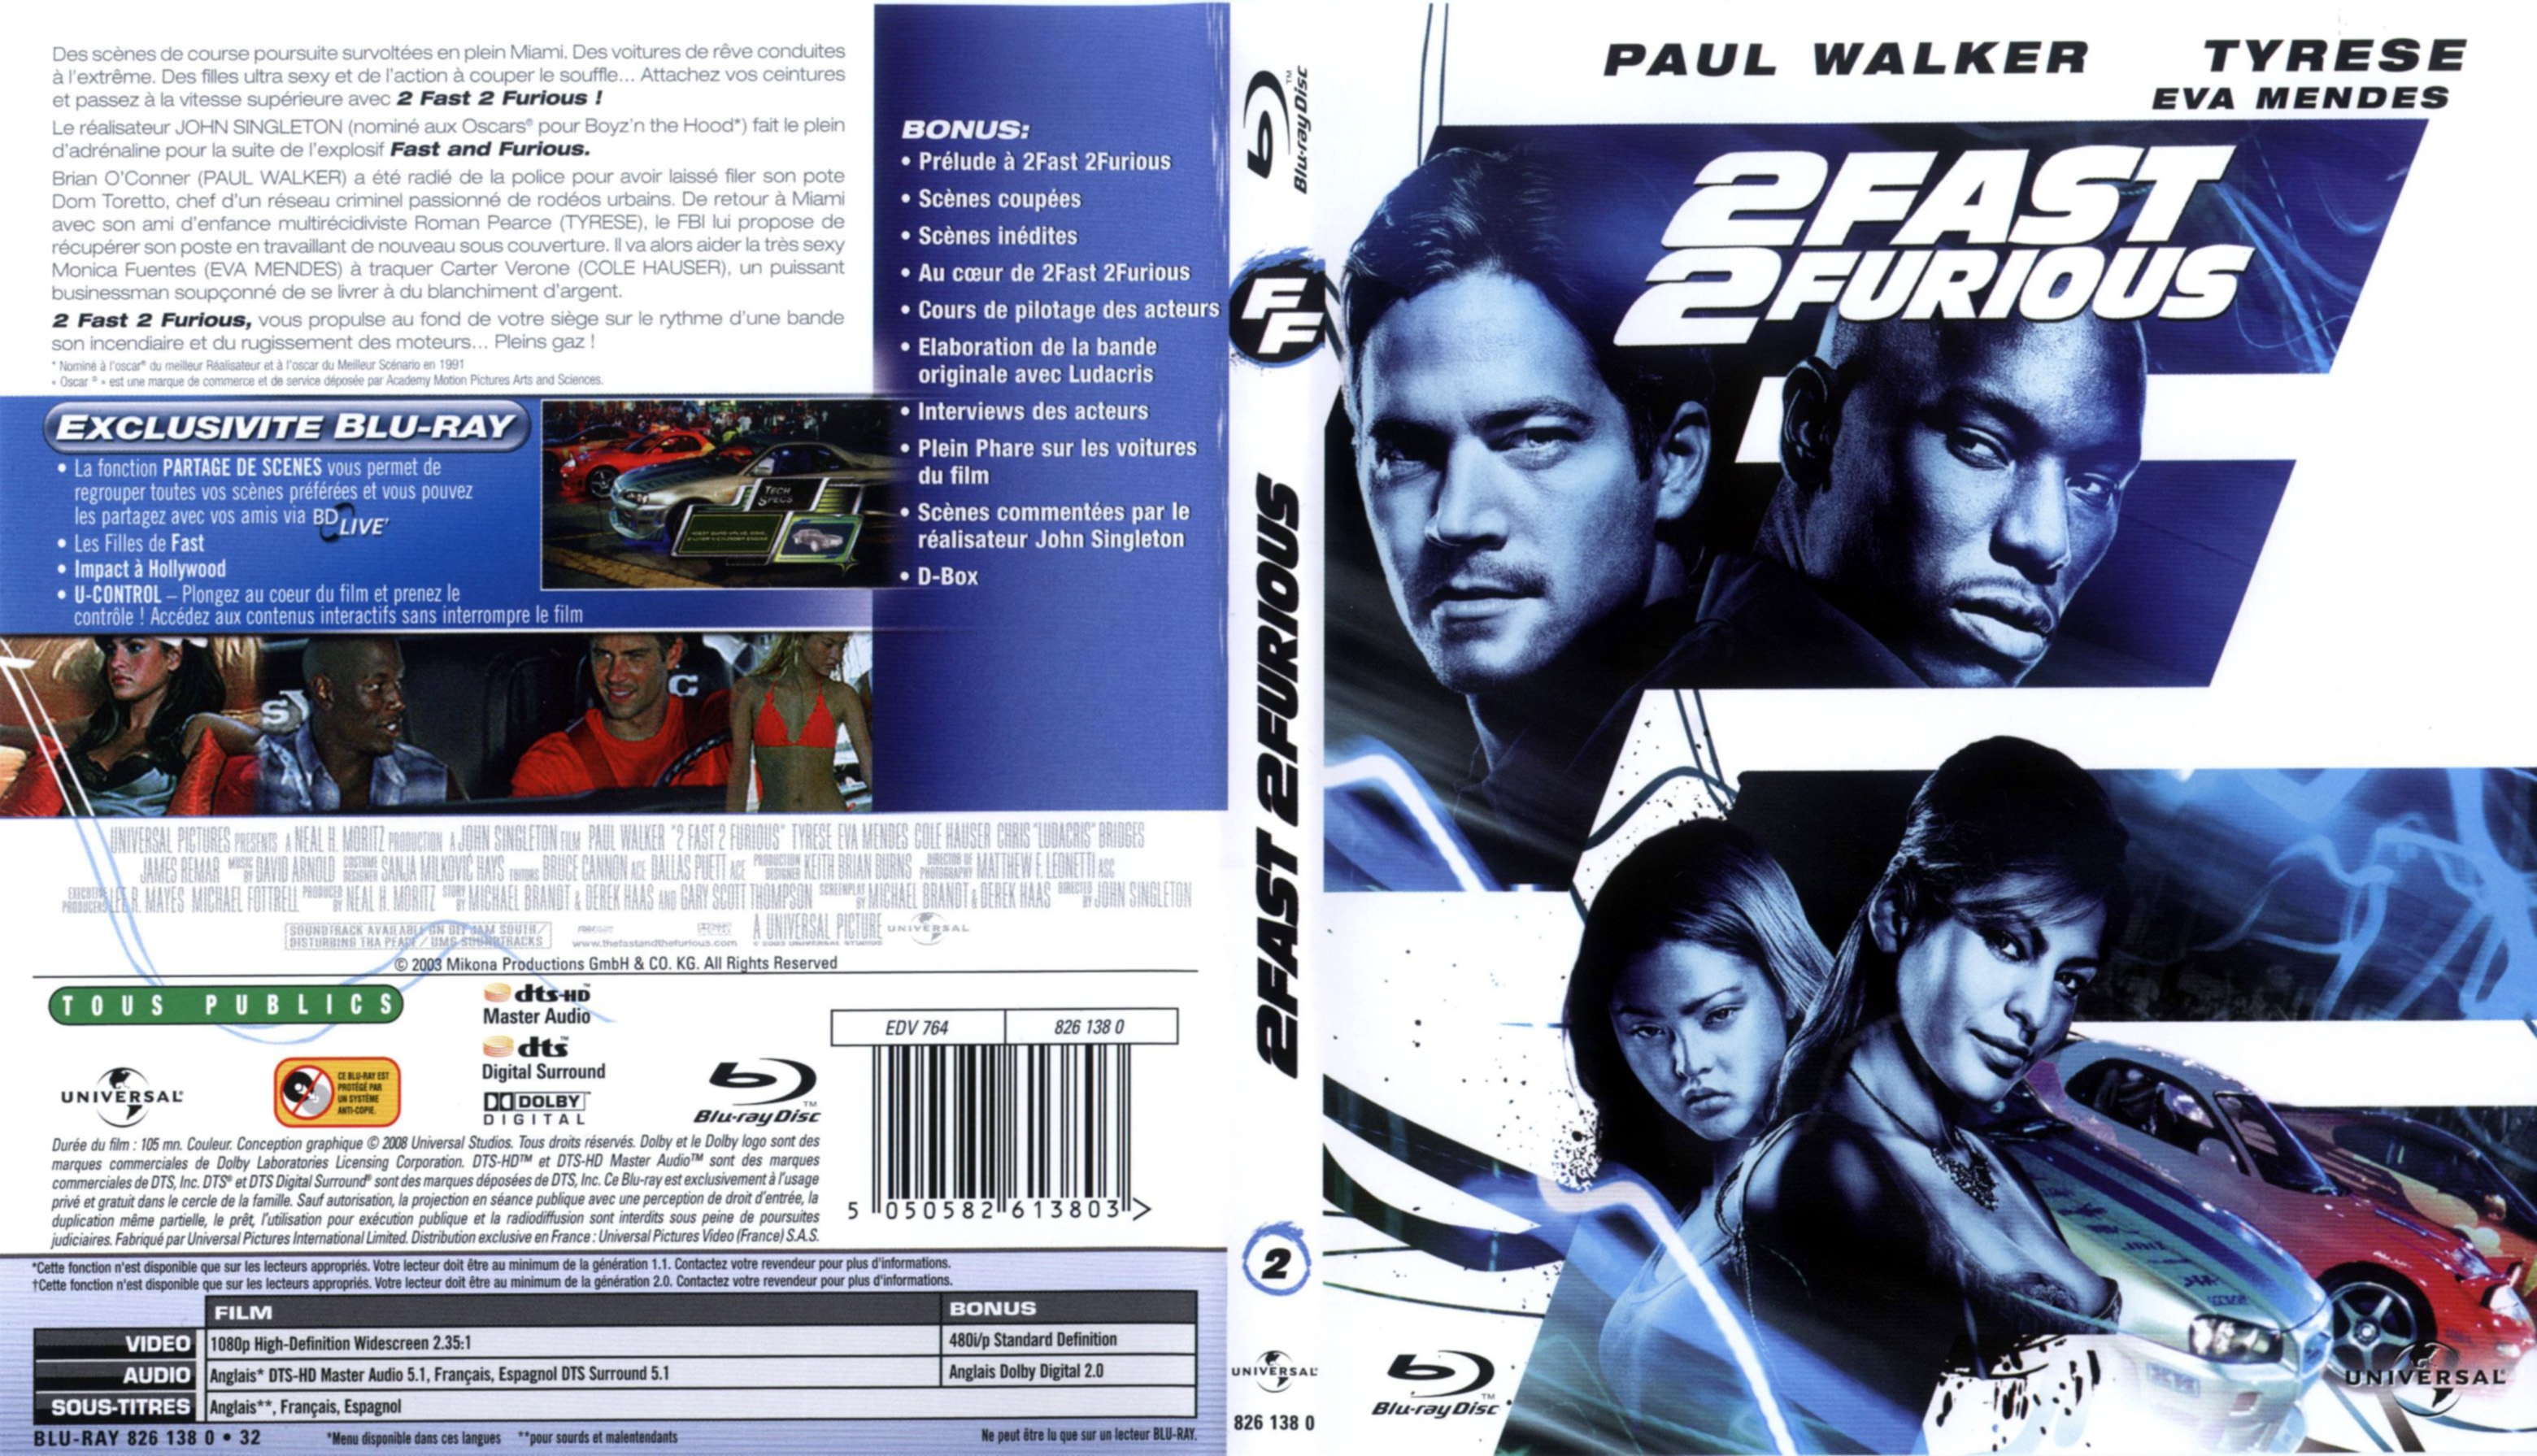 Jaquette DVD 2 fast and furious (BLU-RAY)